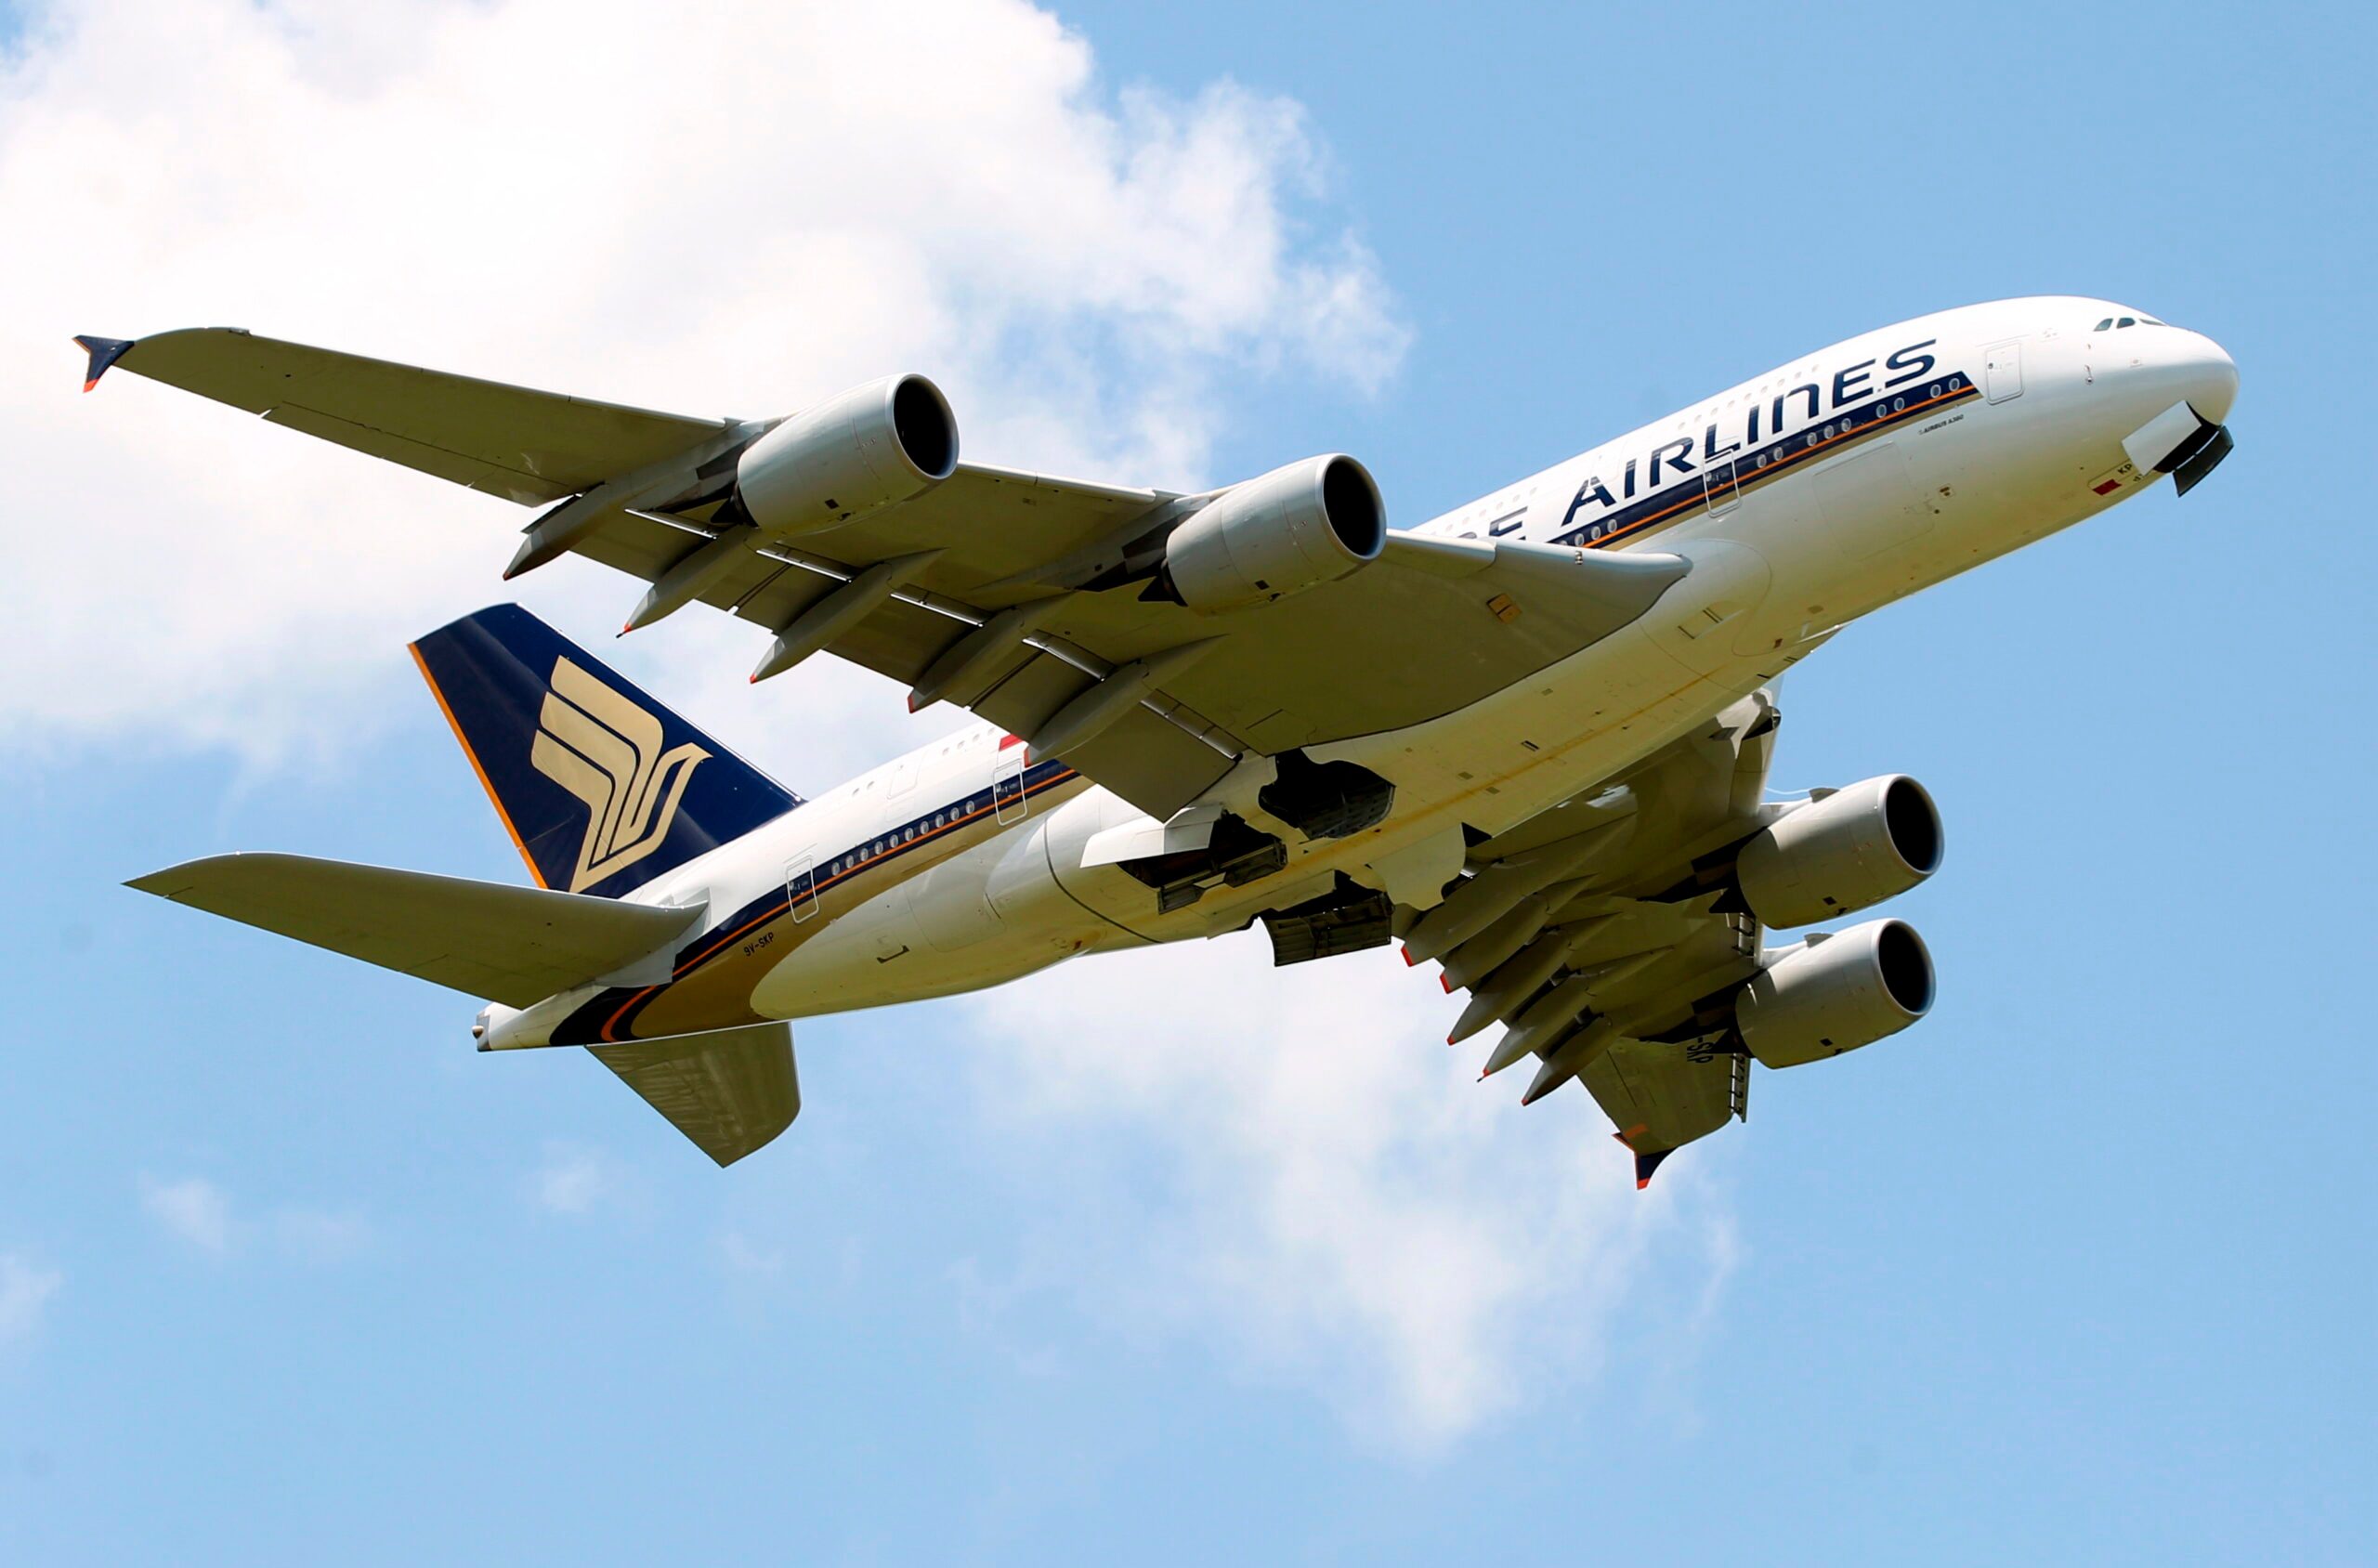 Singapore Airlines full-year net profit more than doubles